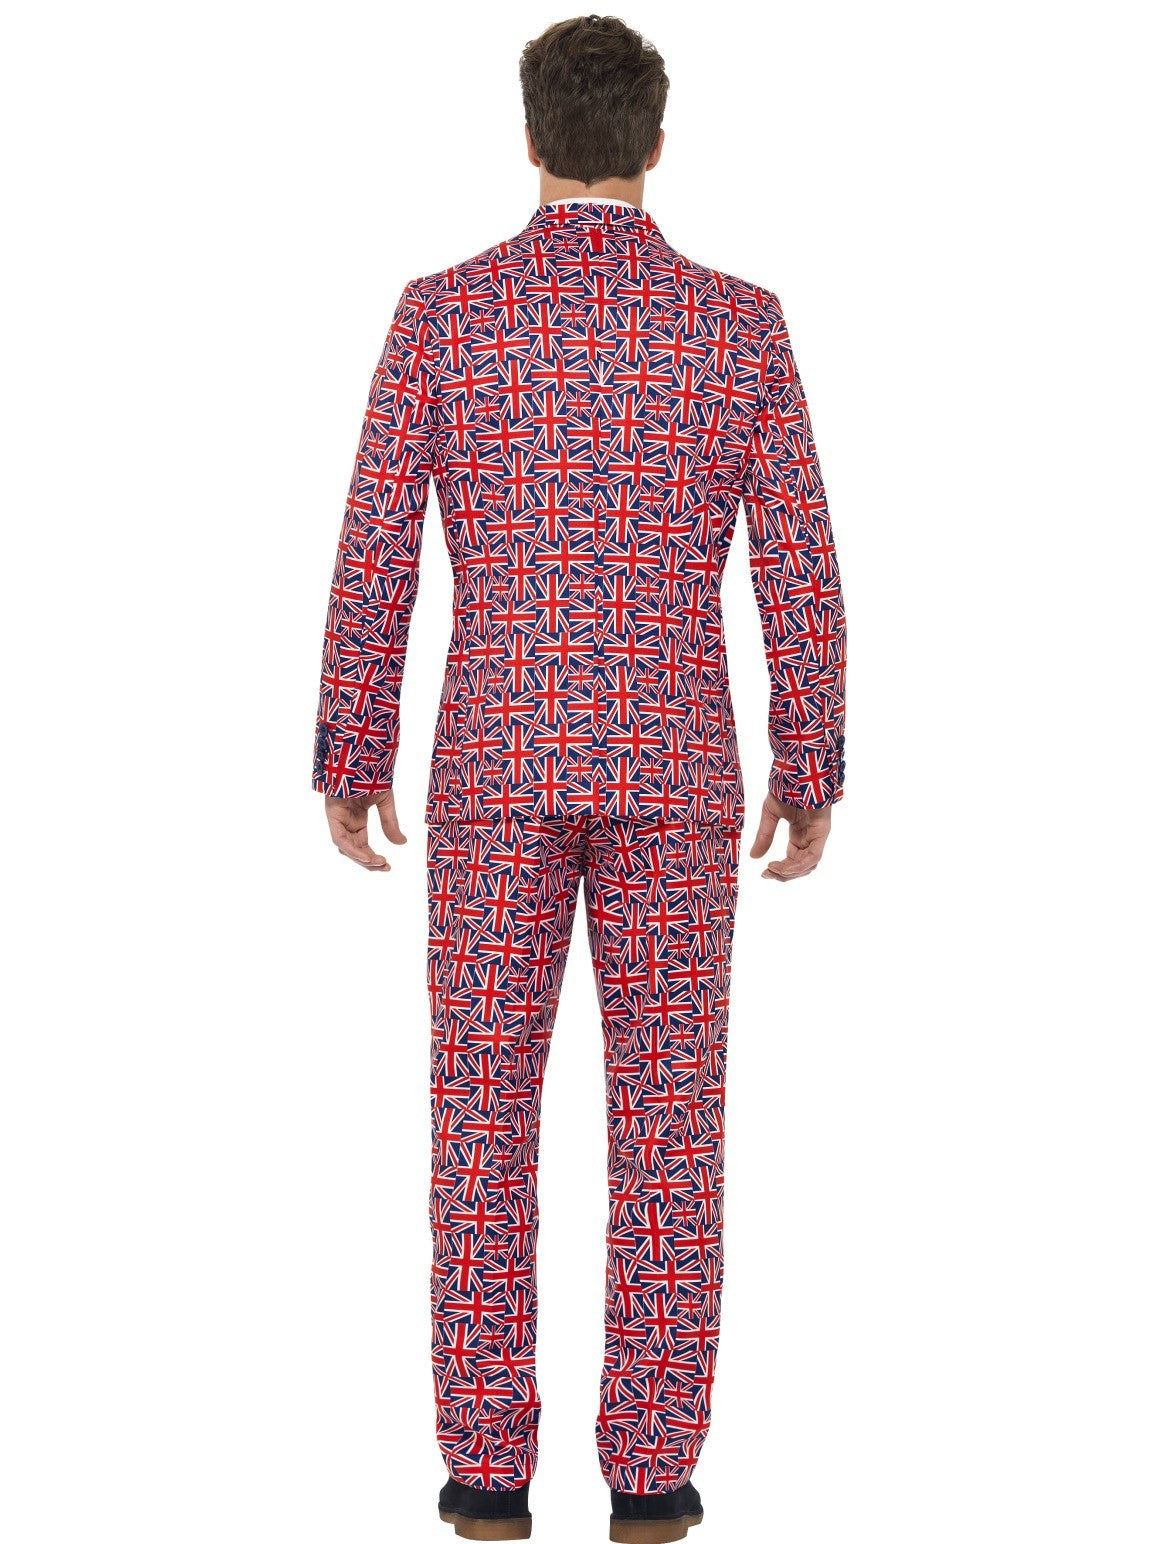 Union Jack Printed Stand Out Suit